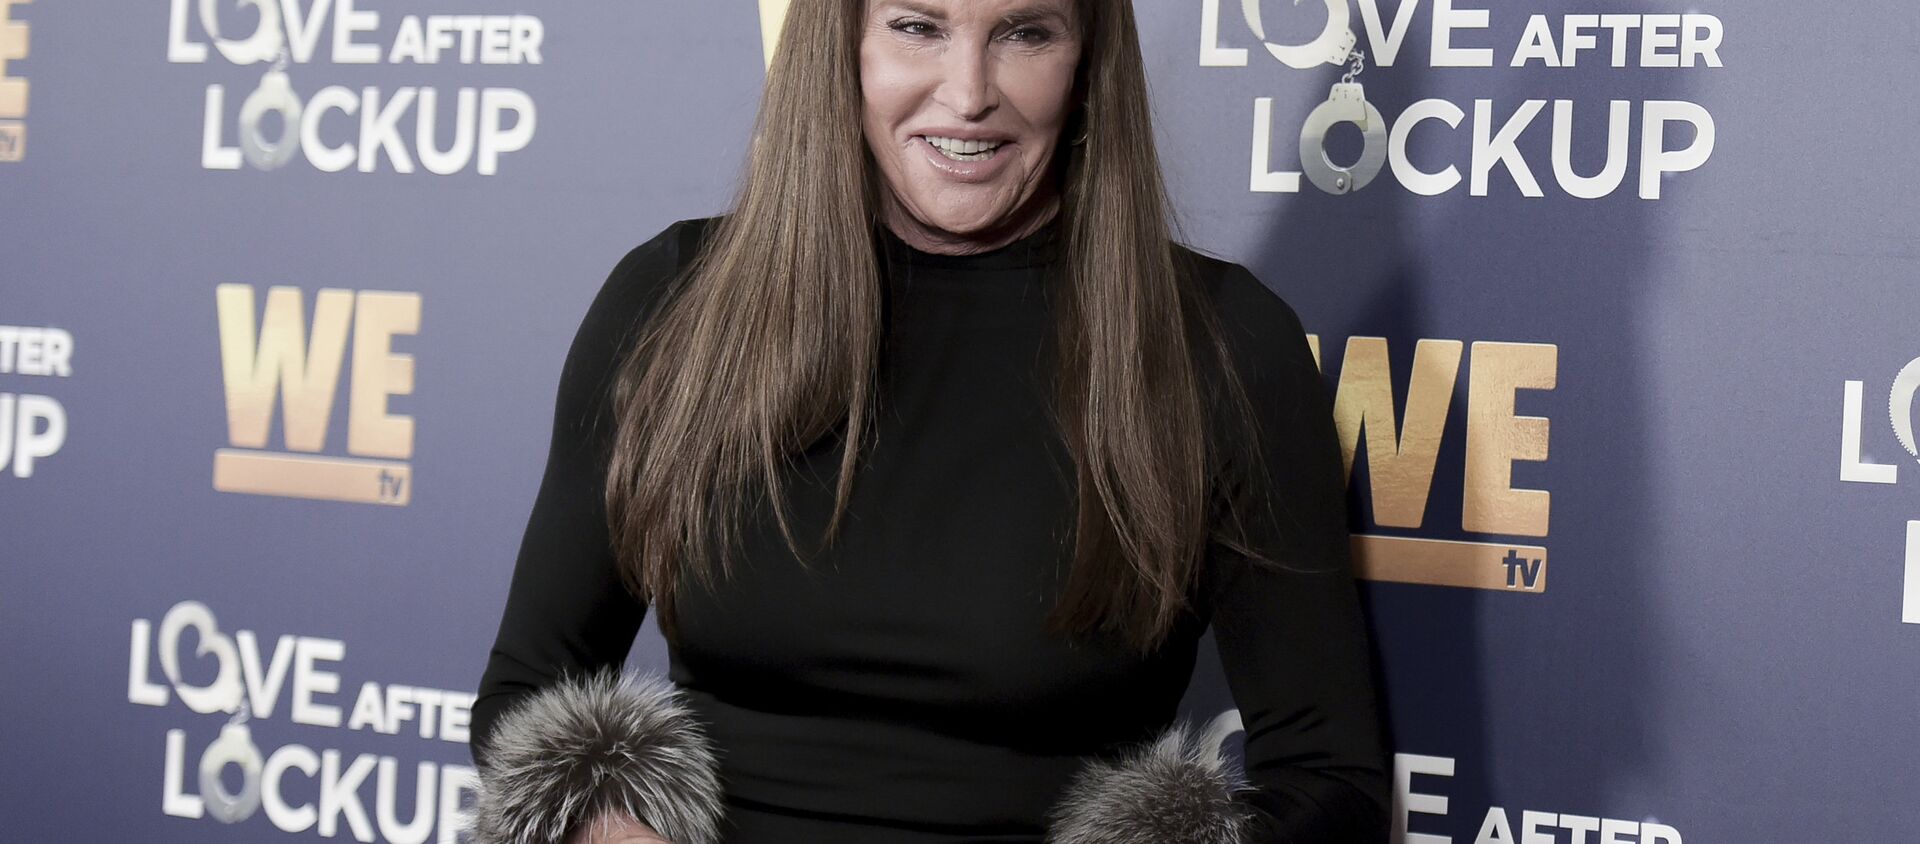 Caitlyn Jenner attends Real Love: Relationship Reality TV's Past, Present and Future on Tuesday, Dec. 11, 2018, in Beverly Hills, Calif. - Sputnik International, 1920, 27.04.2021